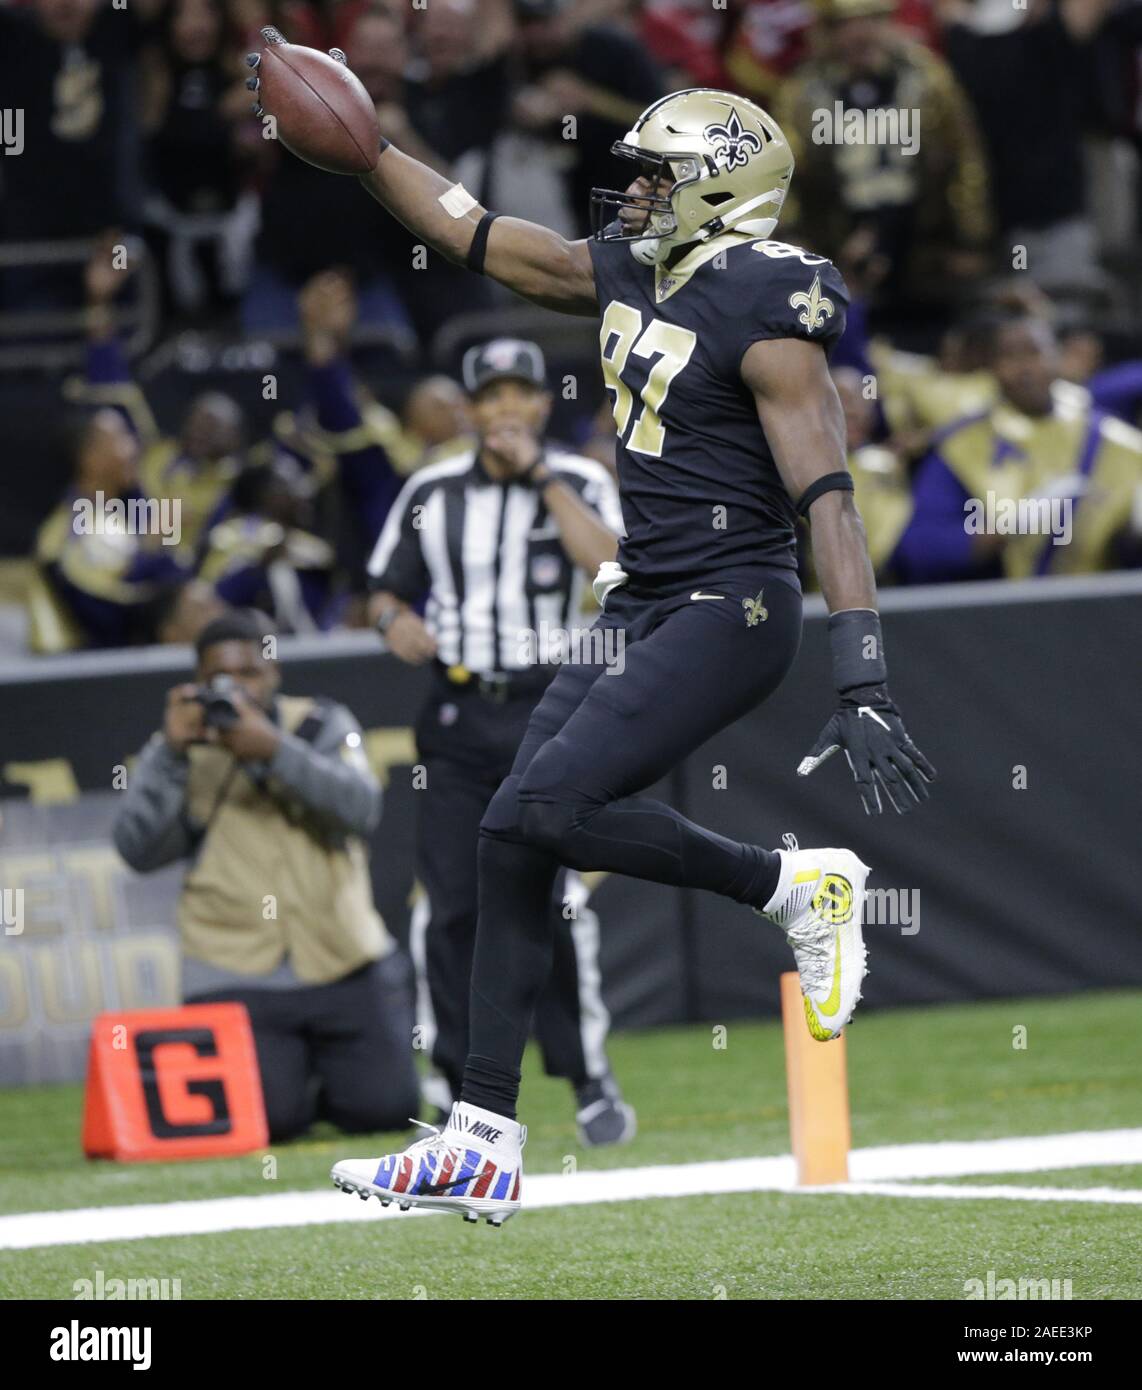 New Orleans, United States. 08th Dec, 2019. New Orleans Saints tight end Jared Cook (87) scores a touchdown against the San Francisco 49ers at the Mercedes-Benz Superdome in New Orleans on Sunday, December 8, 2019. Photo by AJ Sisco/UPI Credit: UPI/Alamy Live News Stock Photo